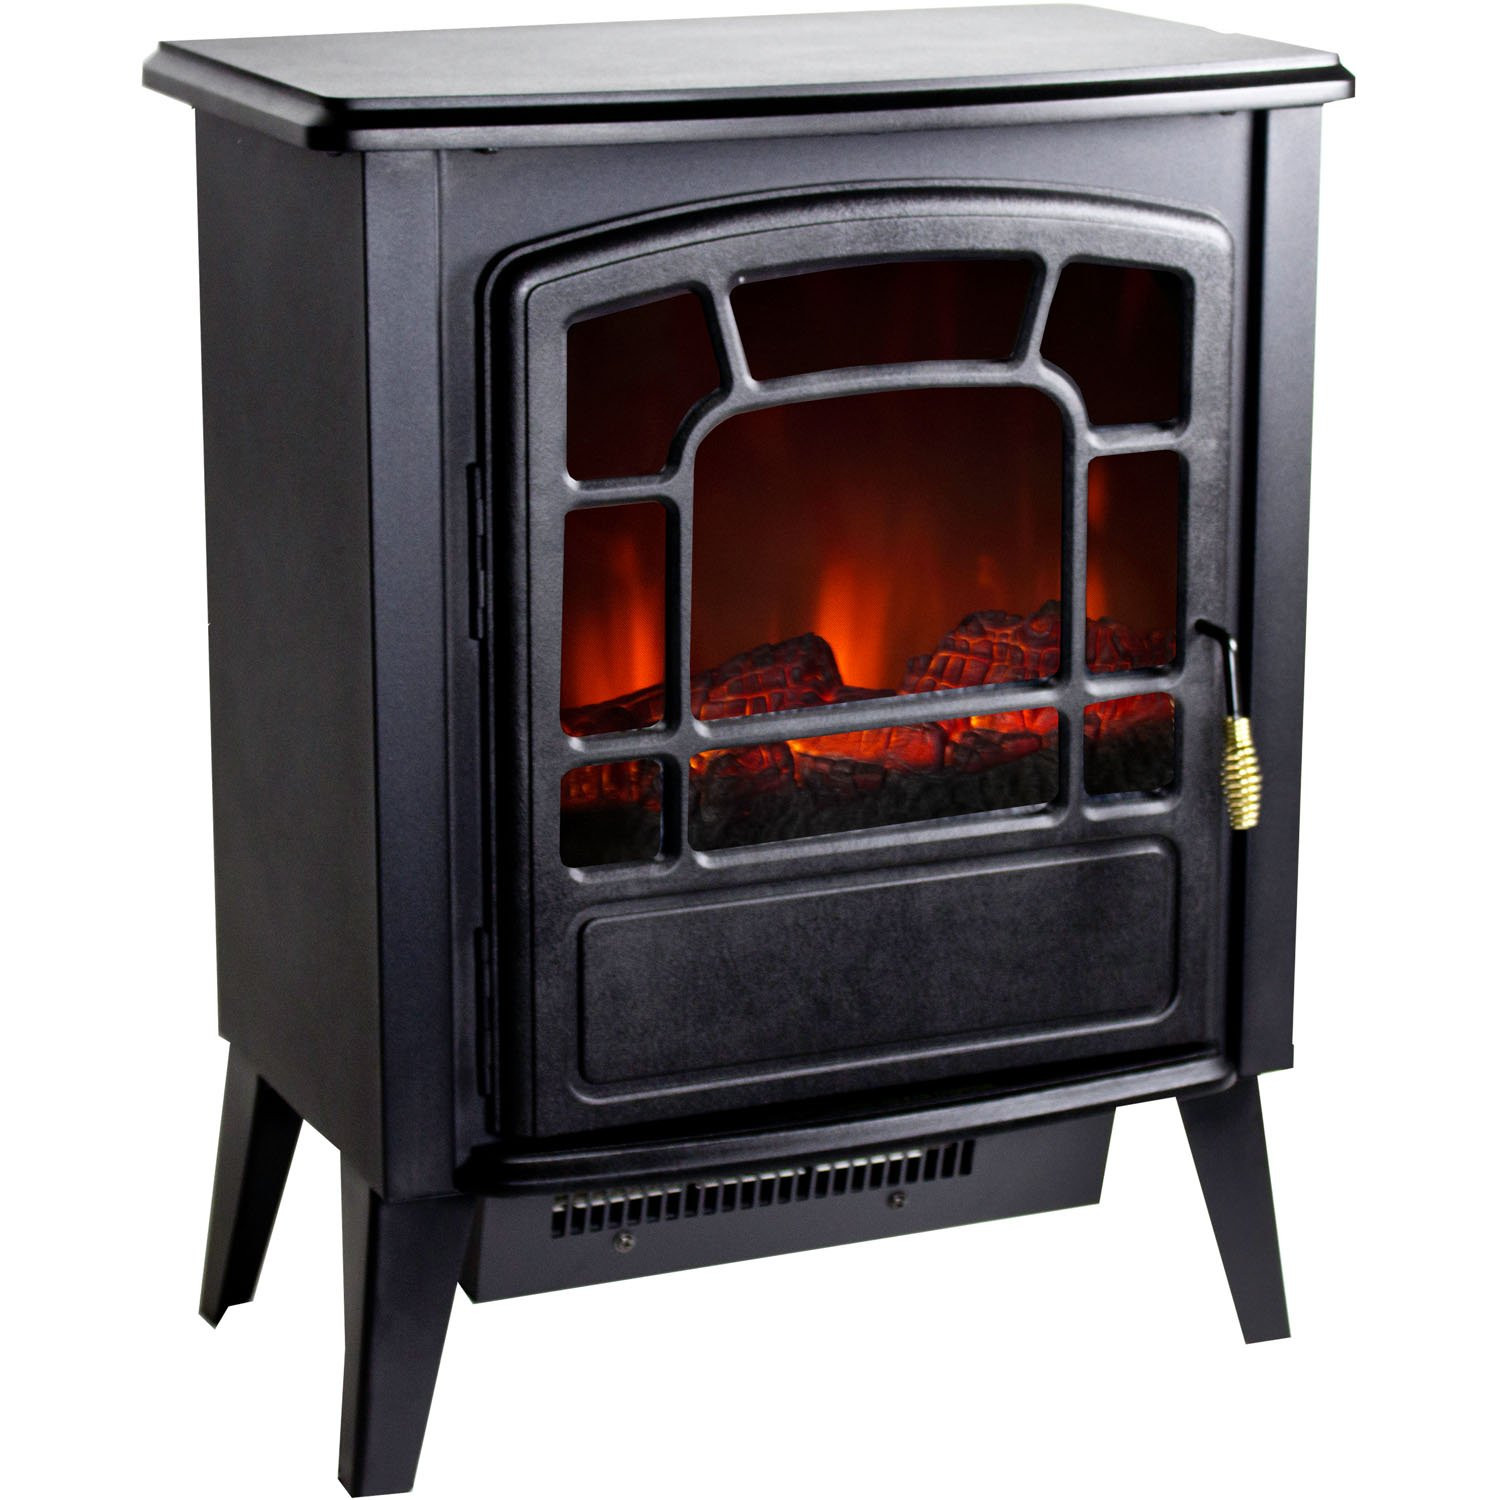 Electric Fireplace Space Heater
 NEW Portable Floor Standing Electric Fireplace Retro